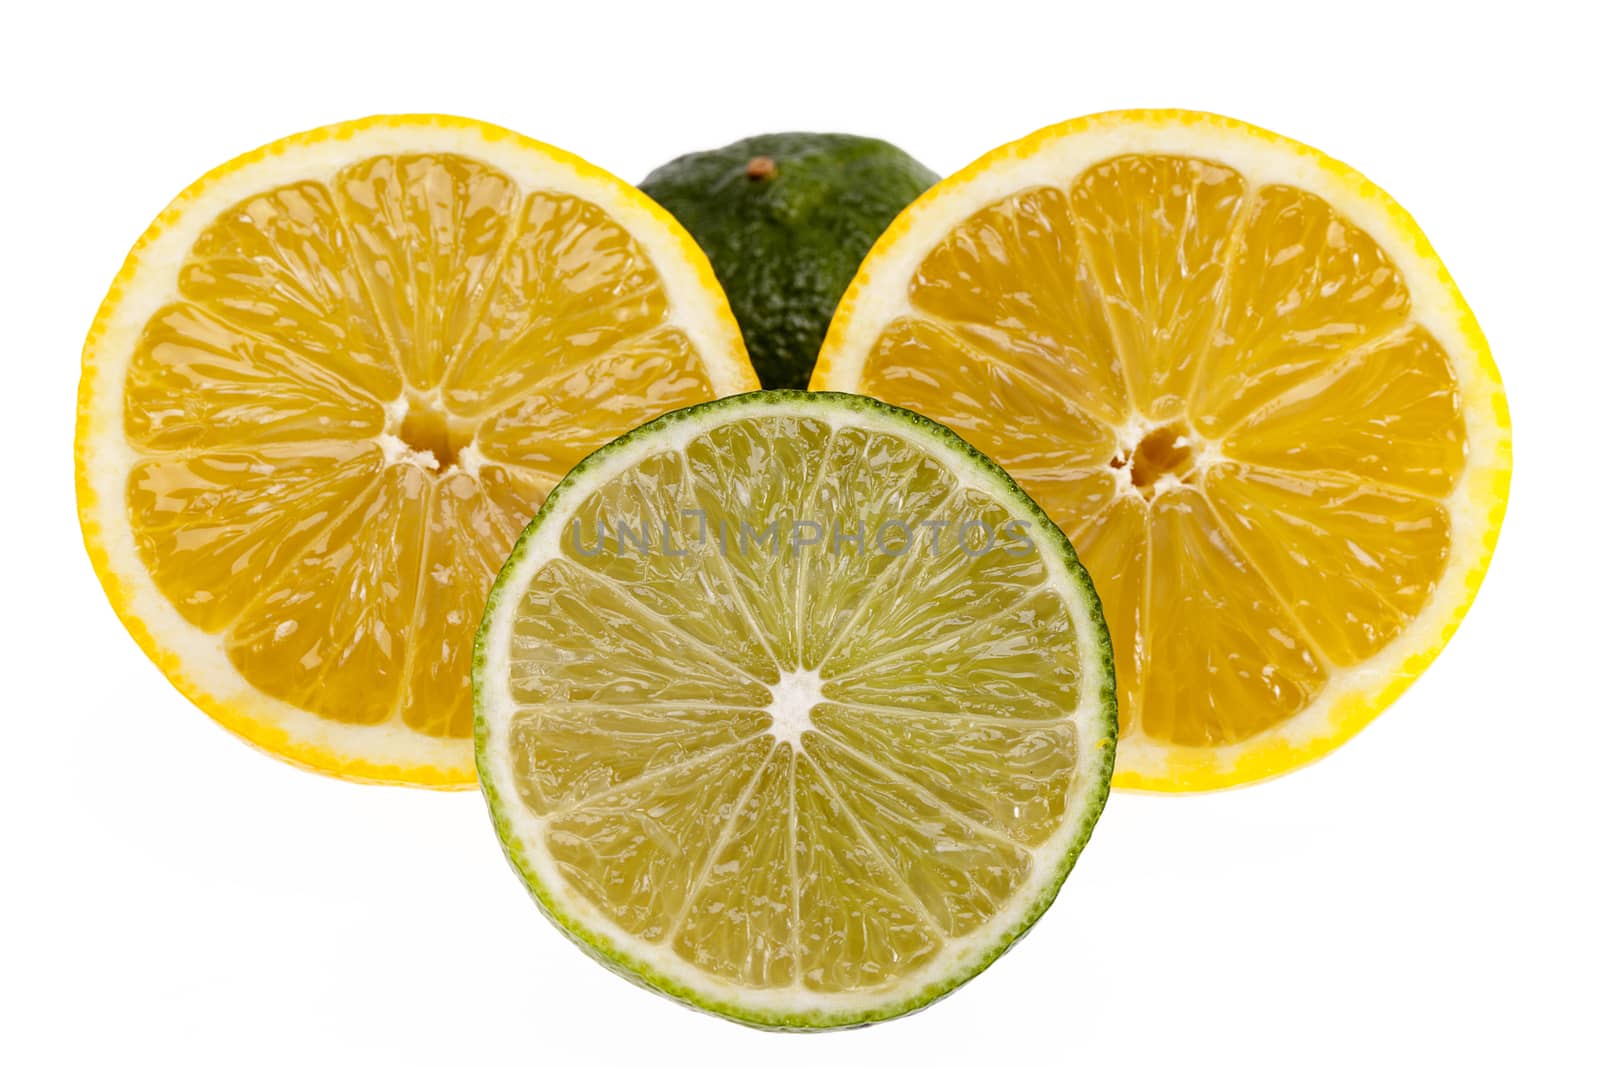 slices of  yellow lemons and green  limes isolated on white background